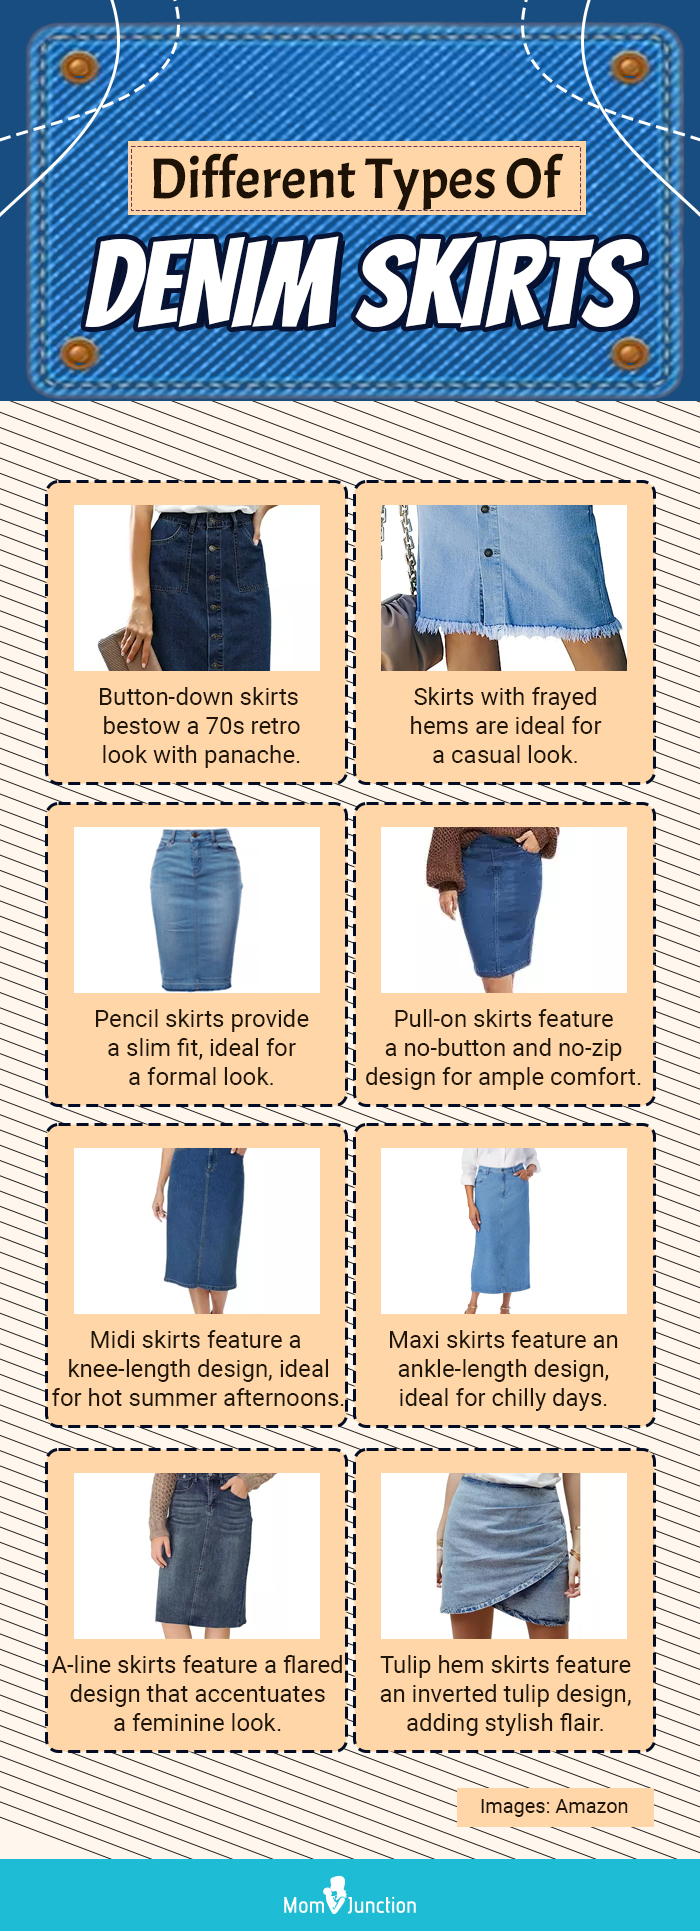 Different Types Of Denim Skirts (infographic)